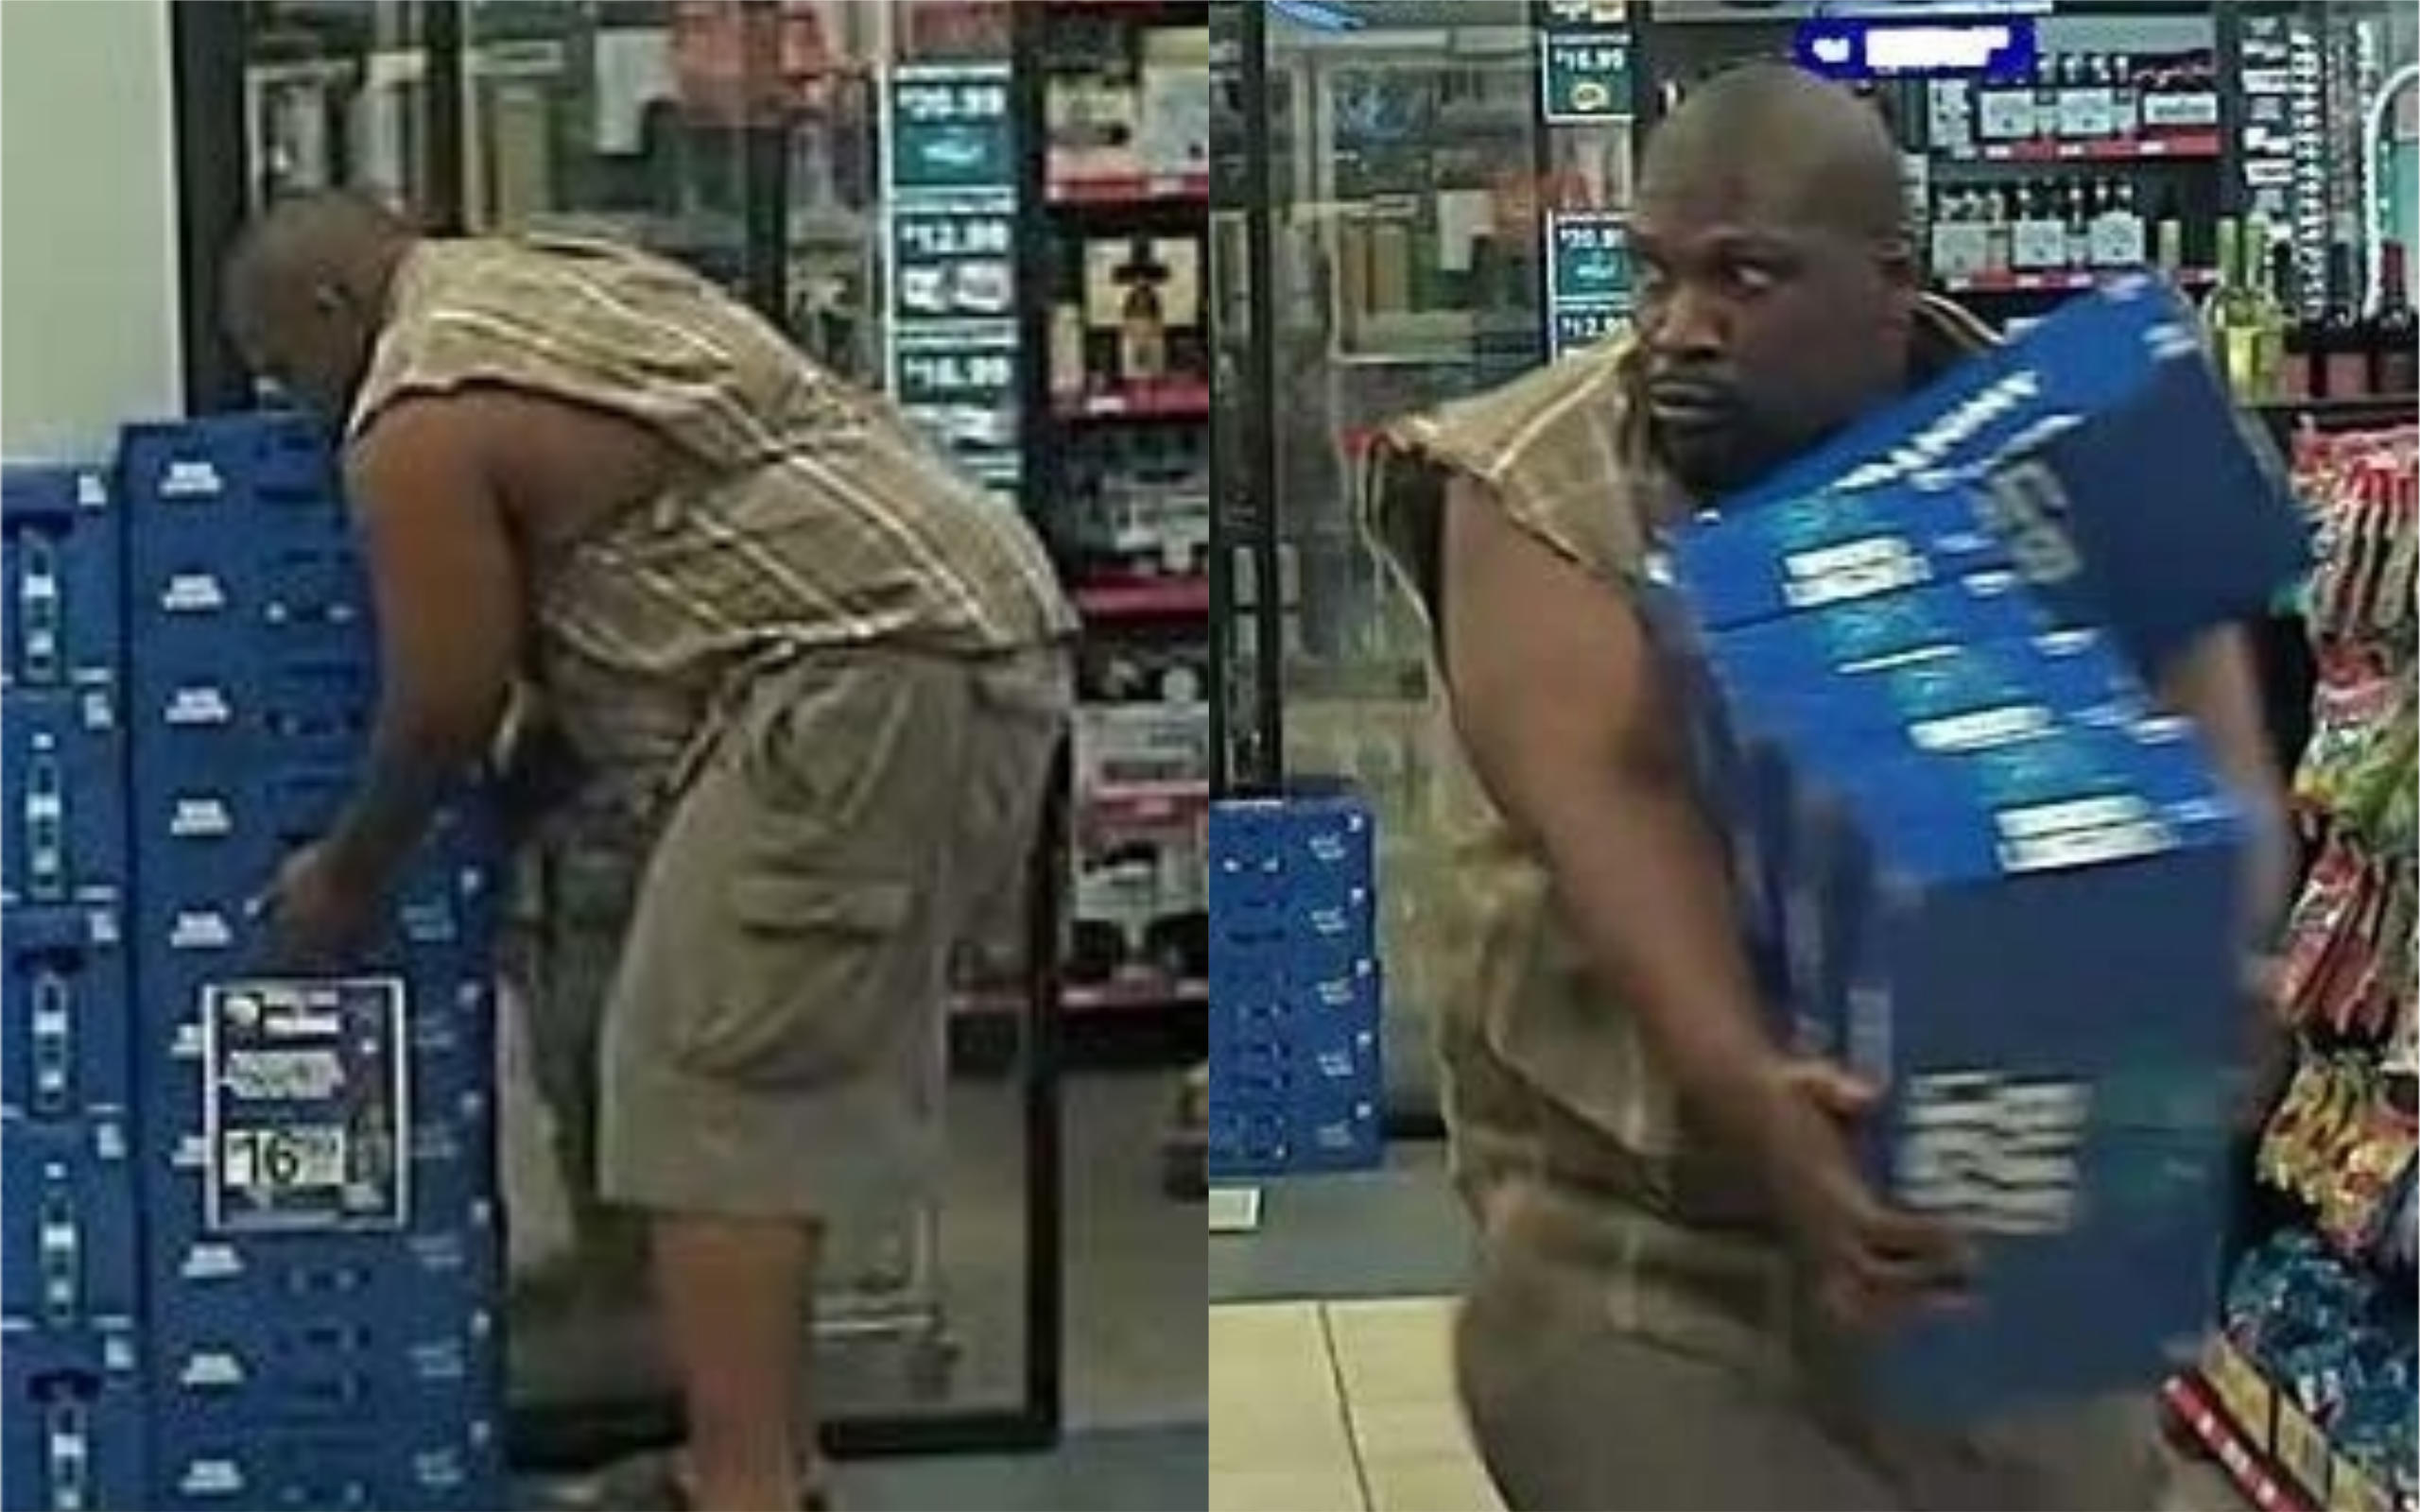 Texas man makes off with 5 cases of Bud Light in "textbook" beer run,  photos of suspected thief go viral - CBS News